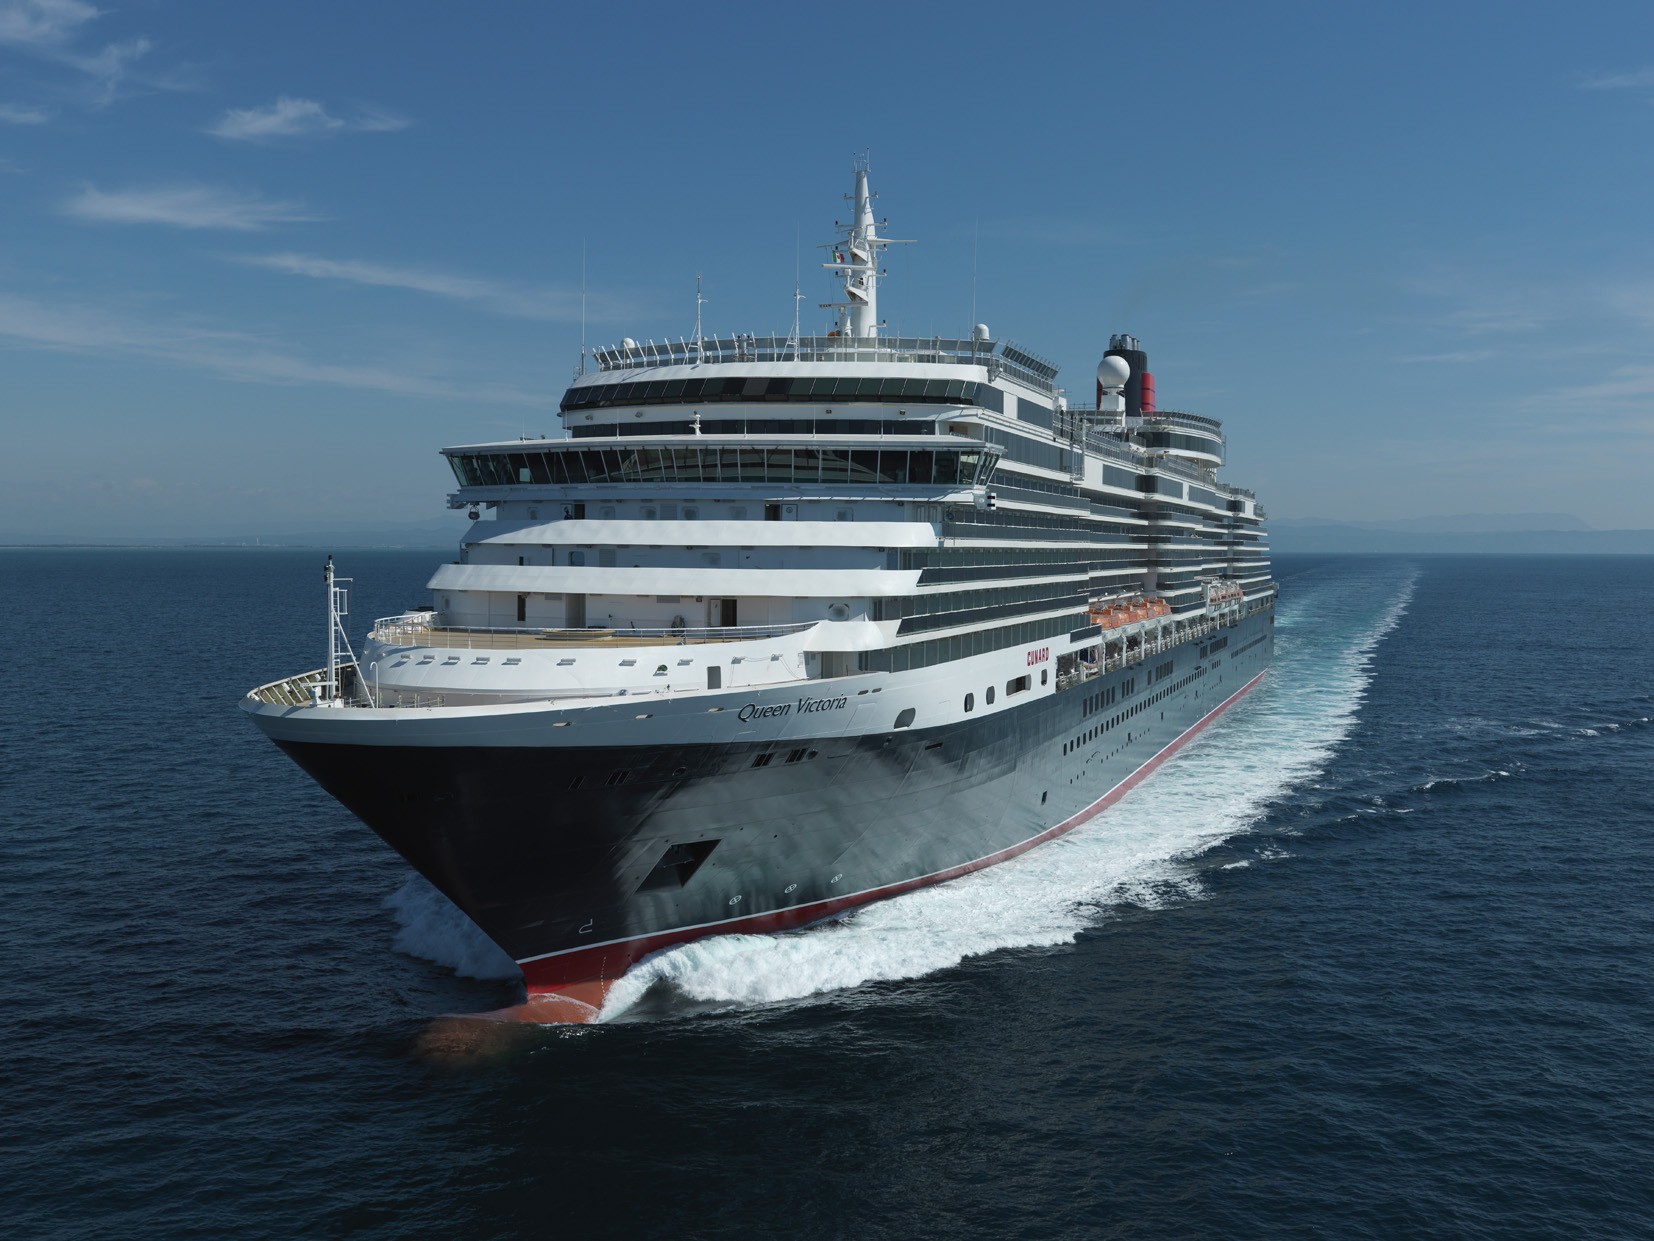 The Authentic Cunard Cruise Line